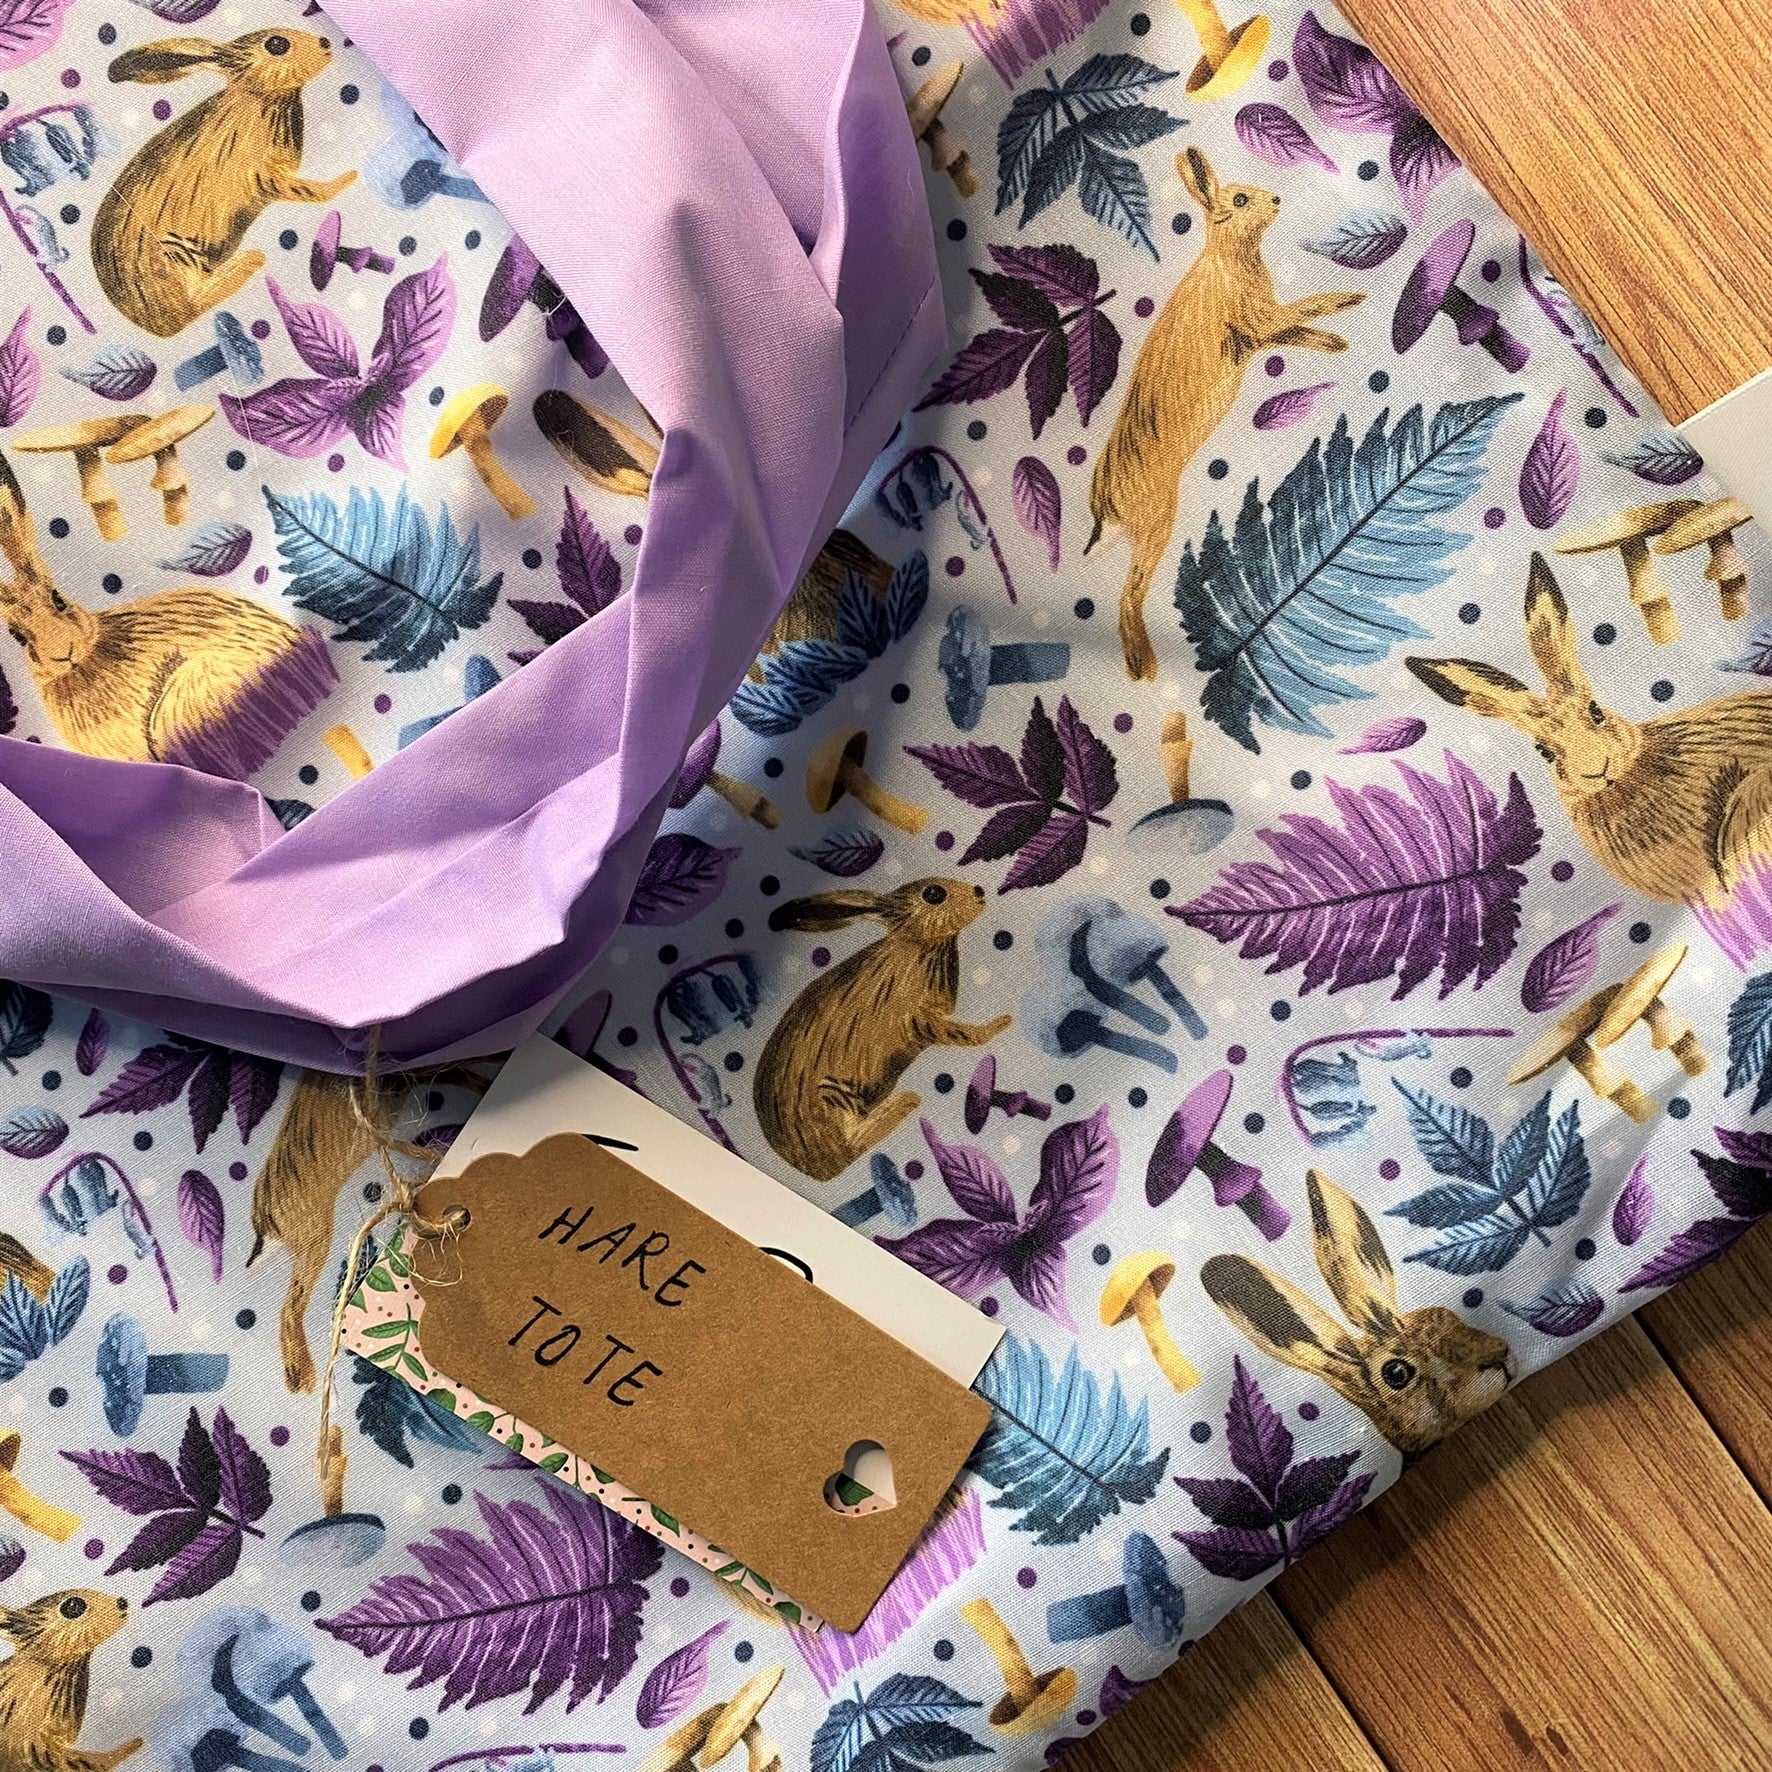 Closeup of surface pattern design on the tote bag featuring hares and foliage in purple and blue. It also shows a purple set of handles and the brown kraft label that says 'Hare Tote' on it.